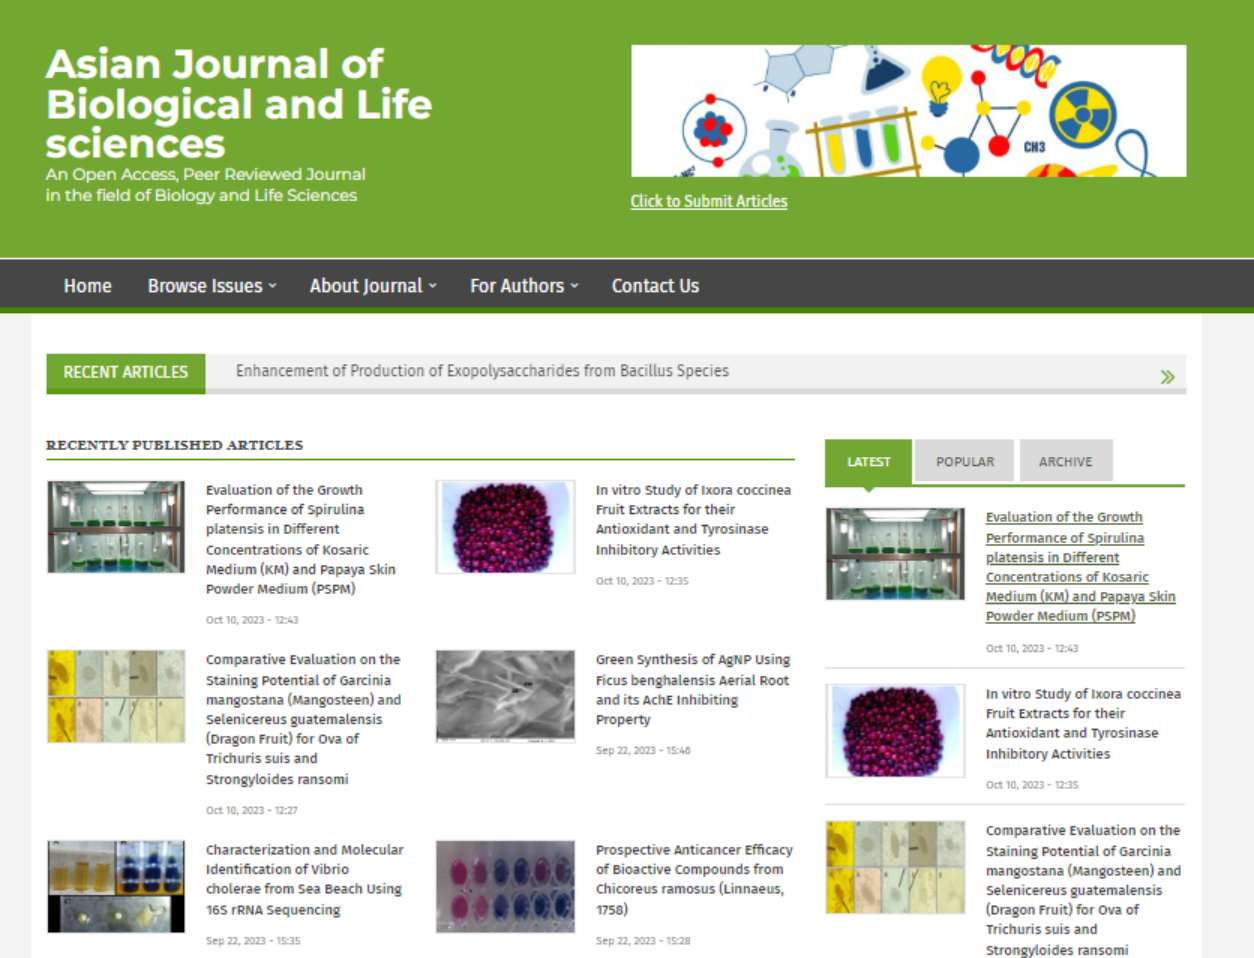 Asian Journal of Biological and Life Sciences